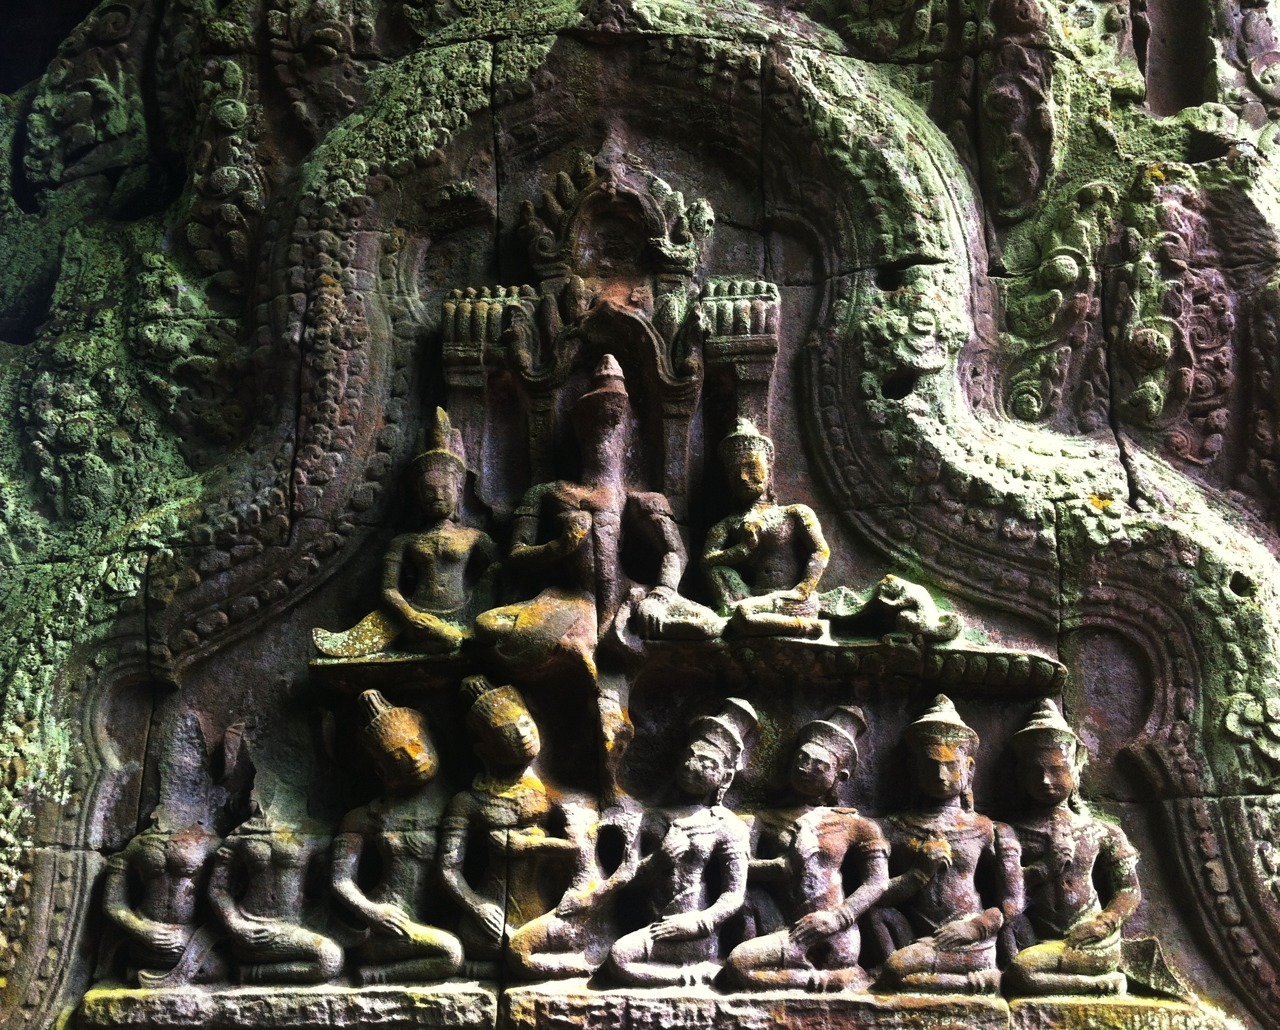 Angkor Wat and Ta Prohm temples